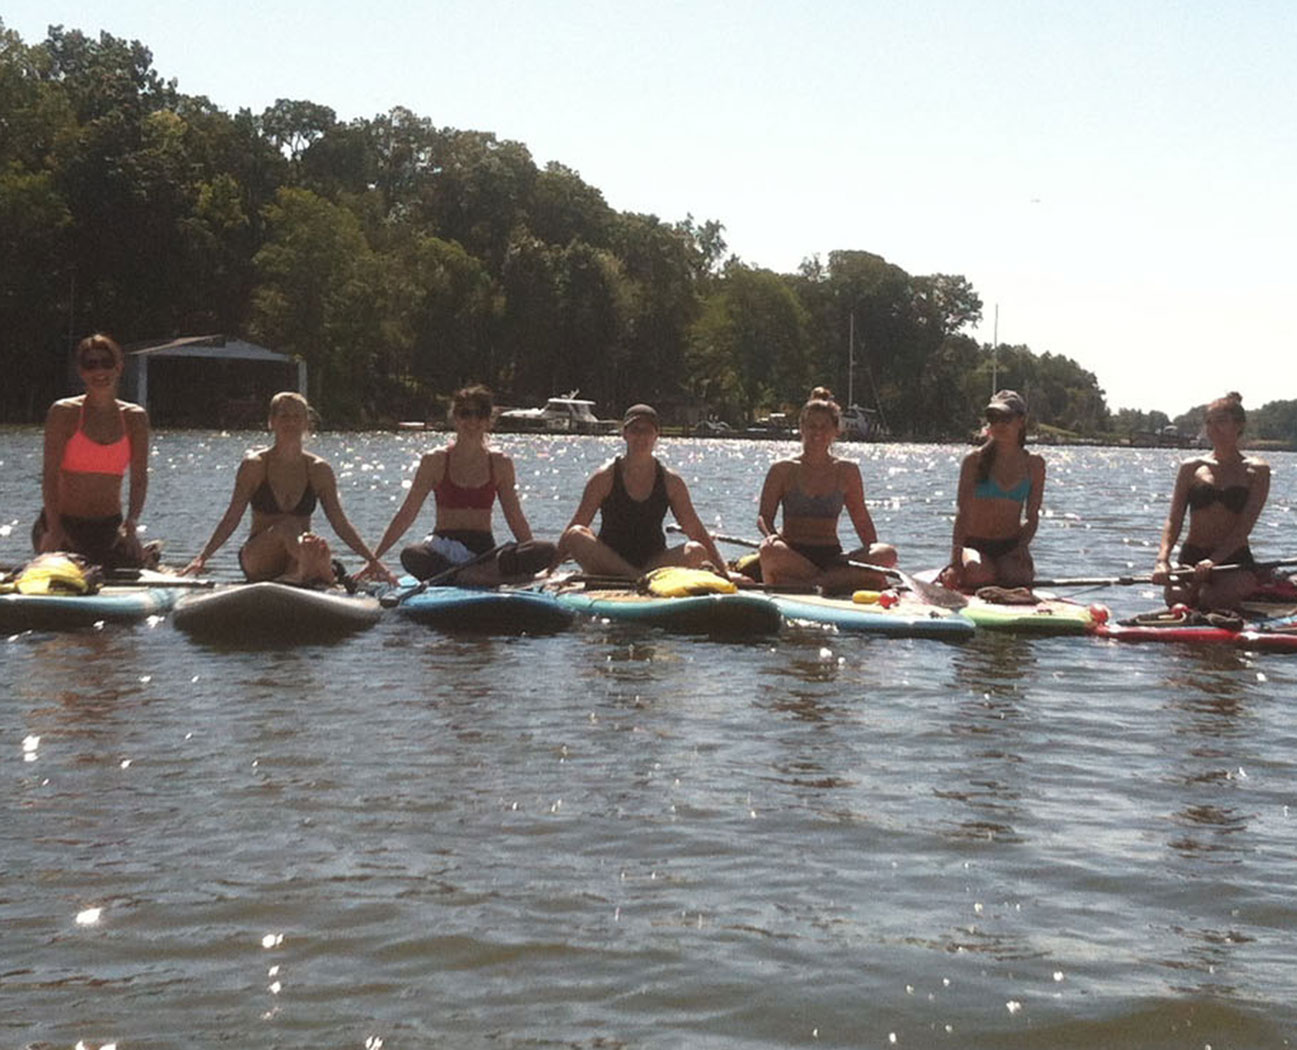 yoga studio and water sport rentals on the South River